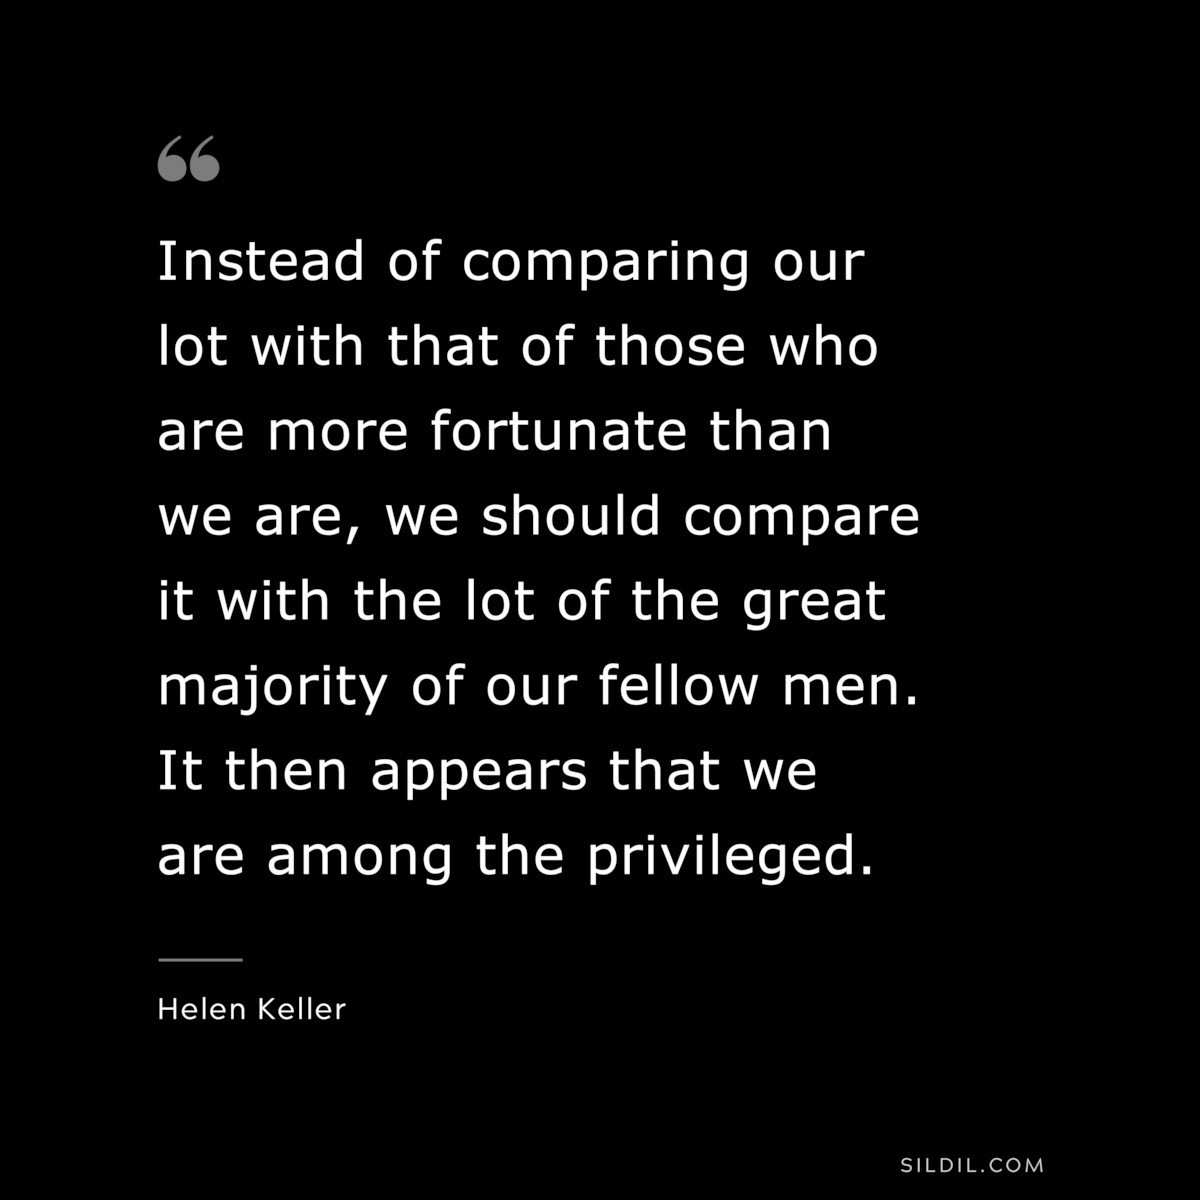 Instead of comparing our lot with that of those who are more fortunate than we are, we should compare it with the lot of the great majority of our fellow men. It then appears that we are among the privileged. ― Helen Keller